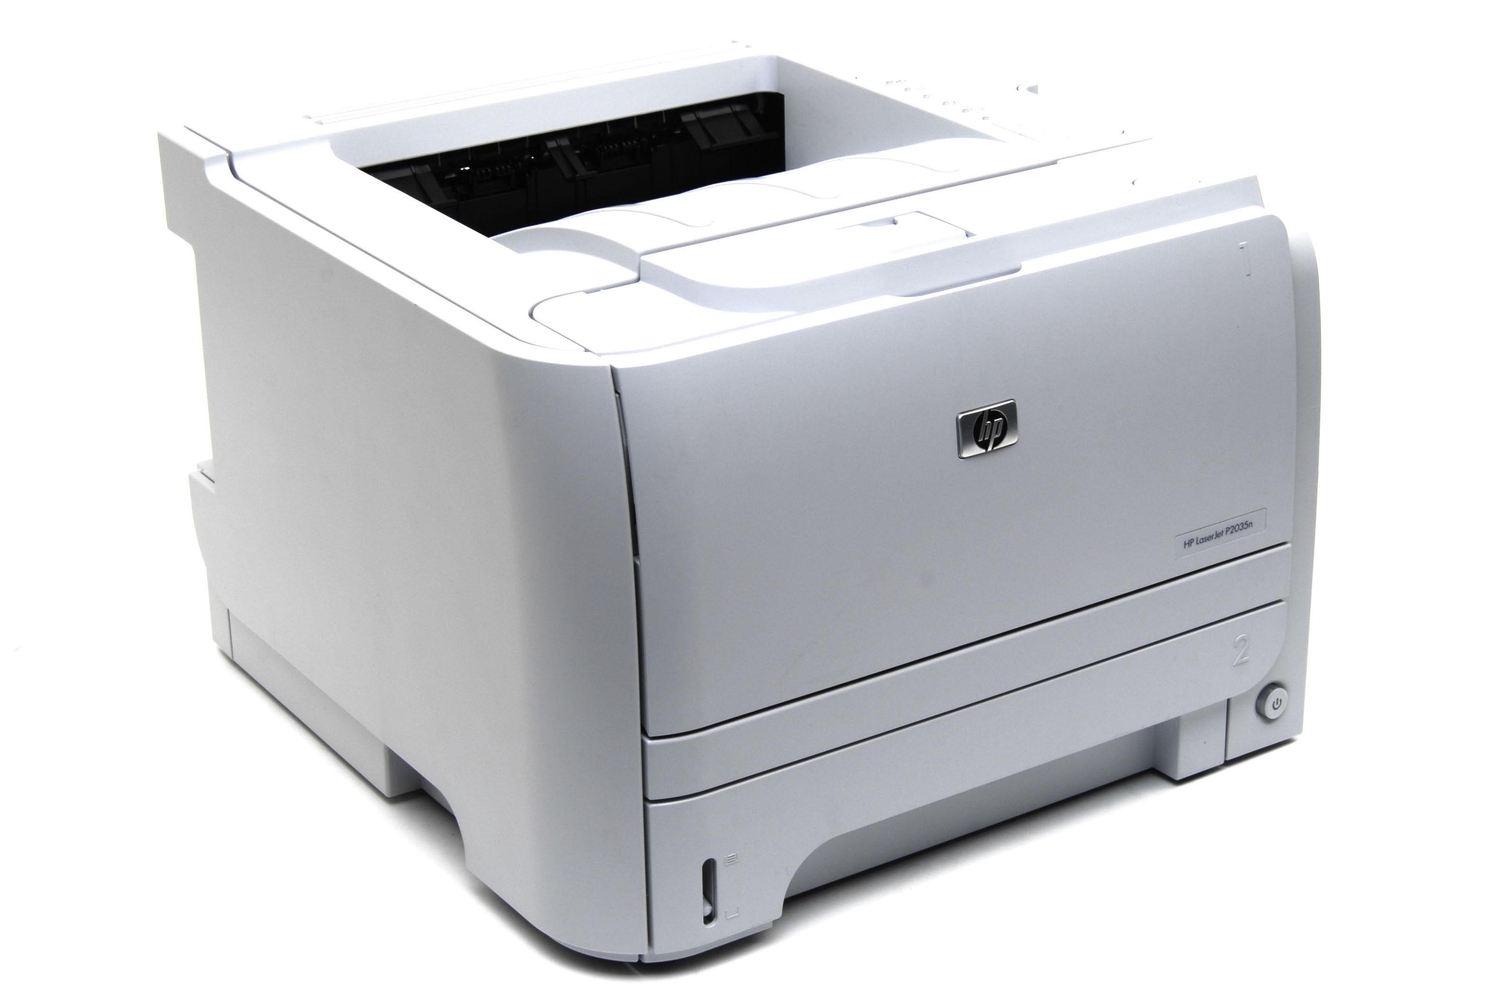 Is it the Right Option to Lease a Printer?